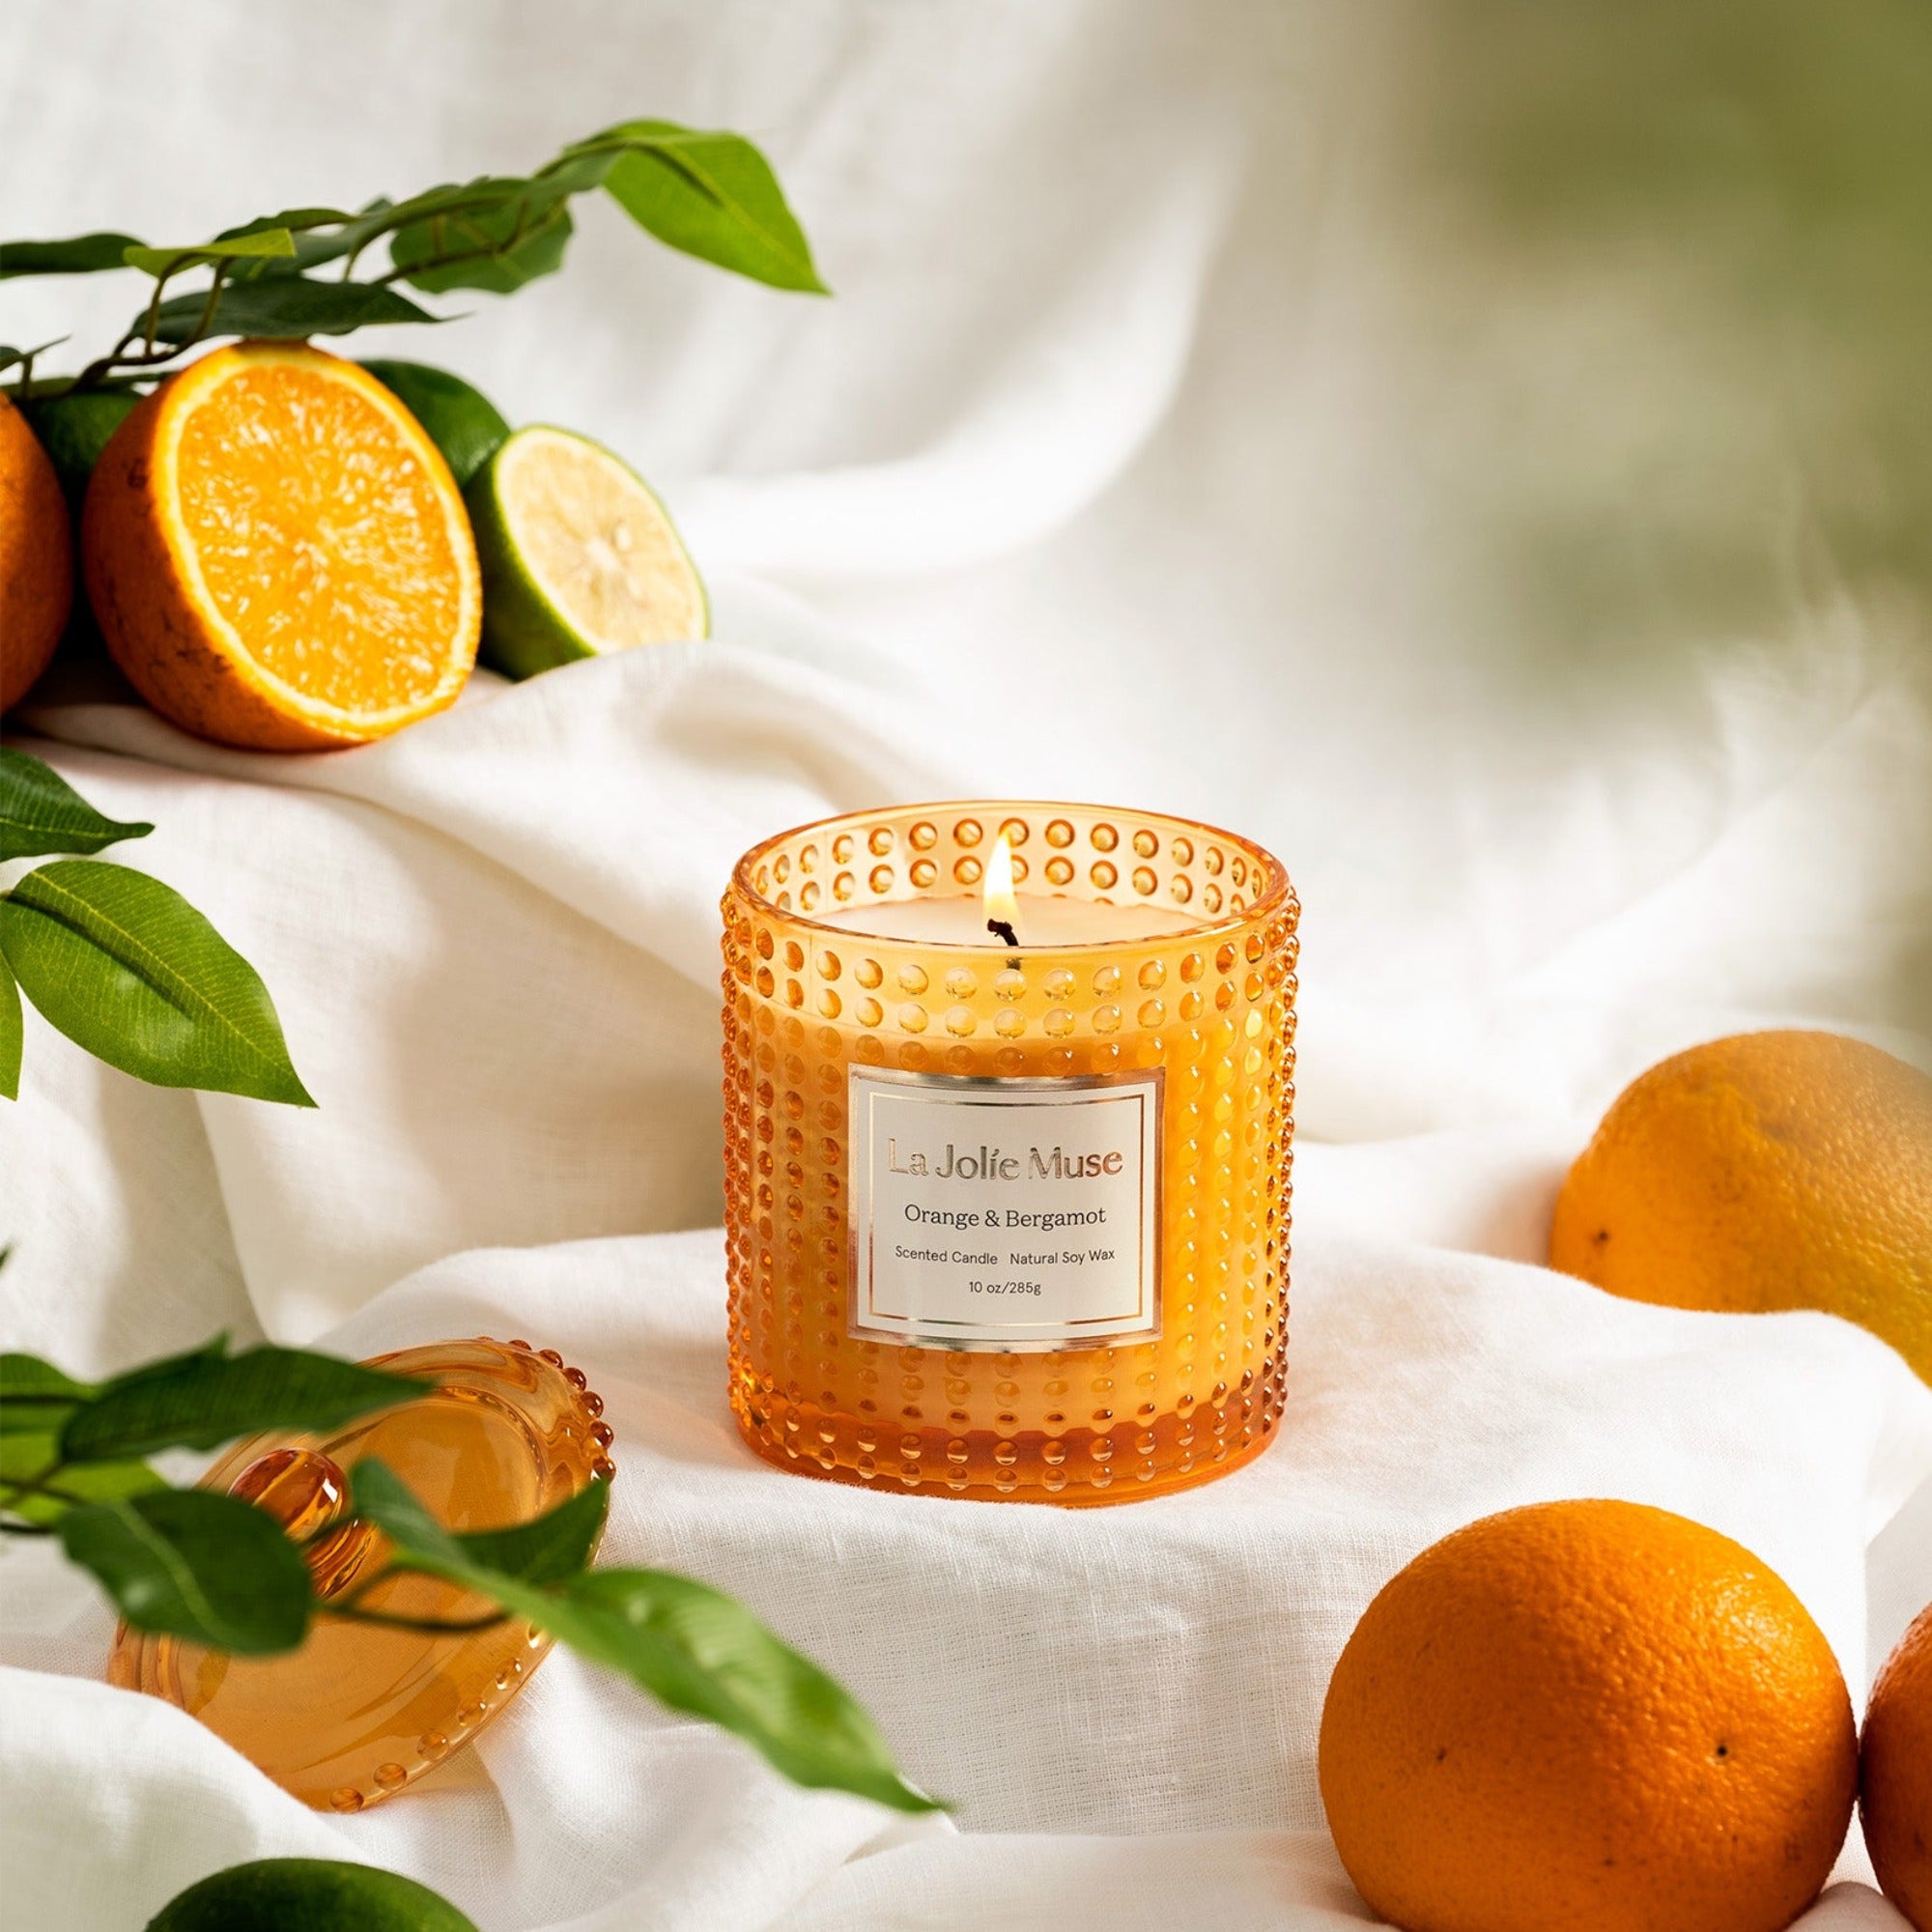 Photo shot of a lit Marvella - Orange & Bergamot 10oz candle placed on a tablecloth, surrounded by citrus fruits.